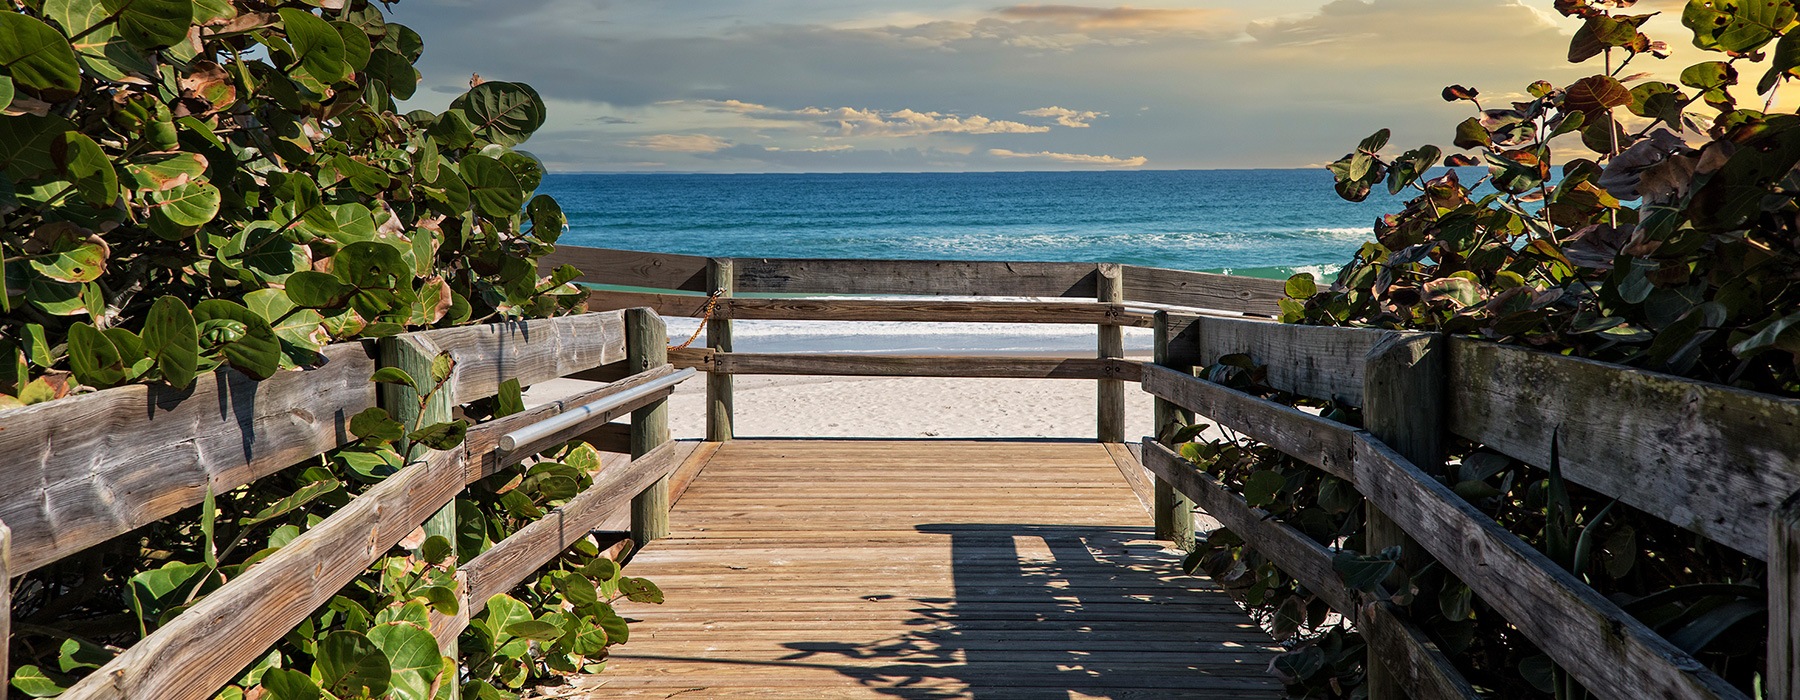 lifestyle image of a dock leading to the ocean